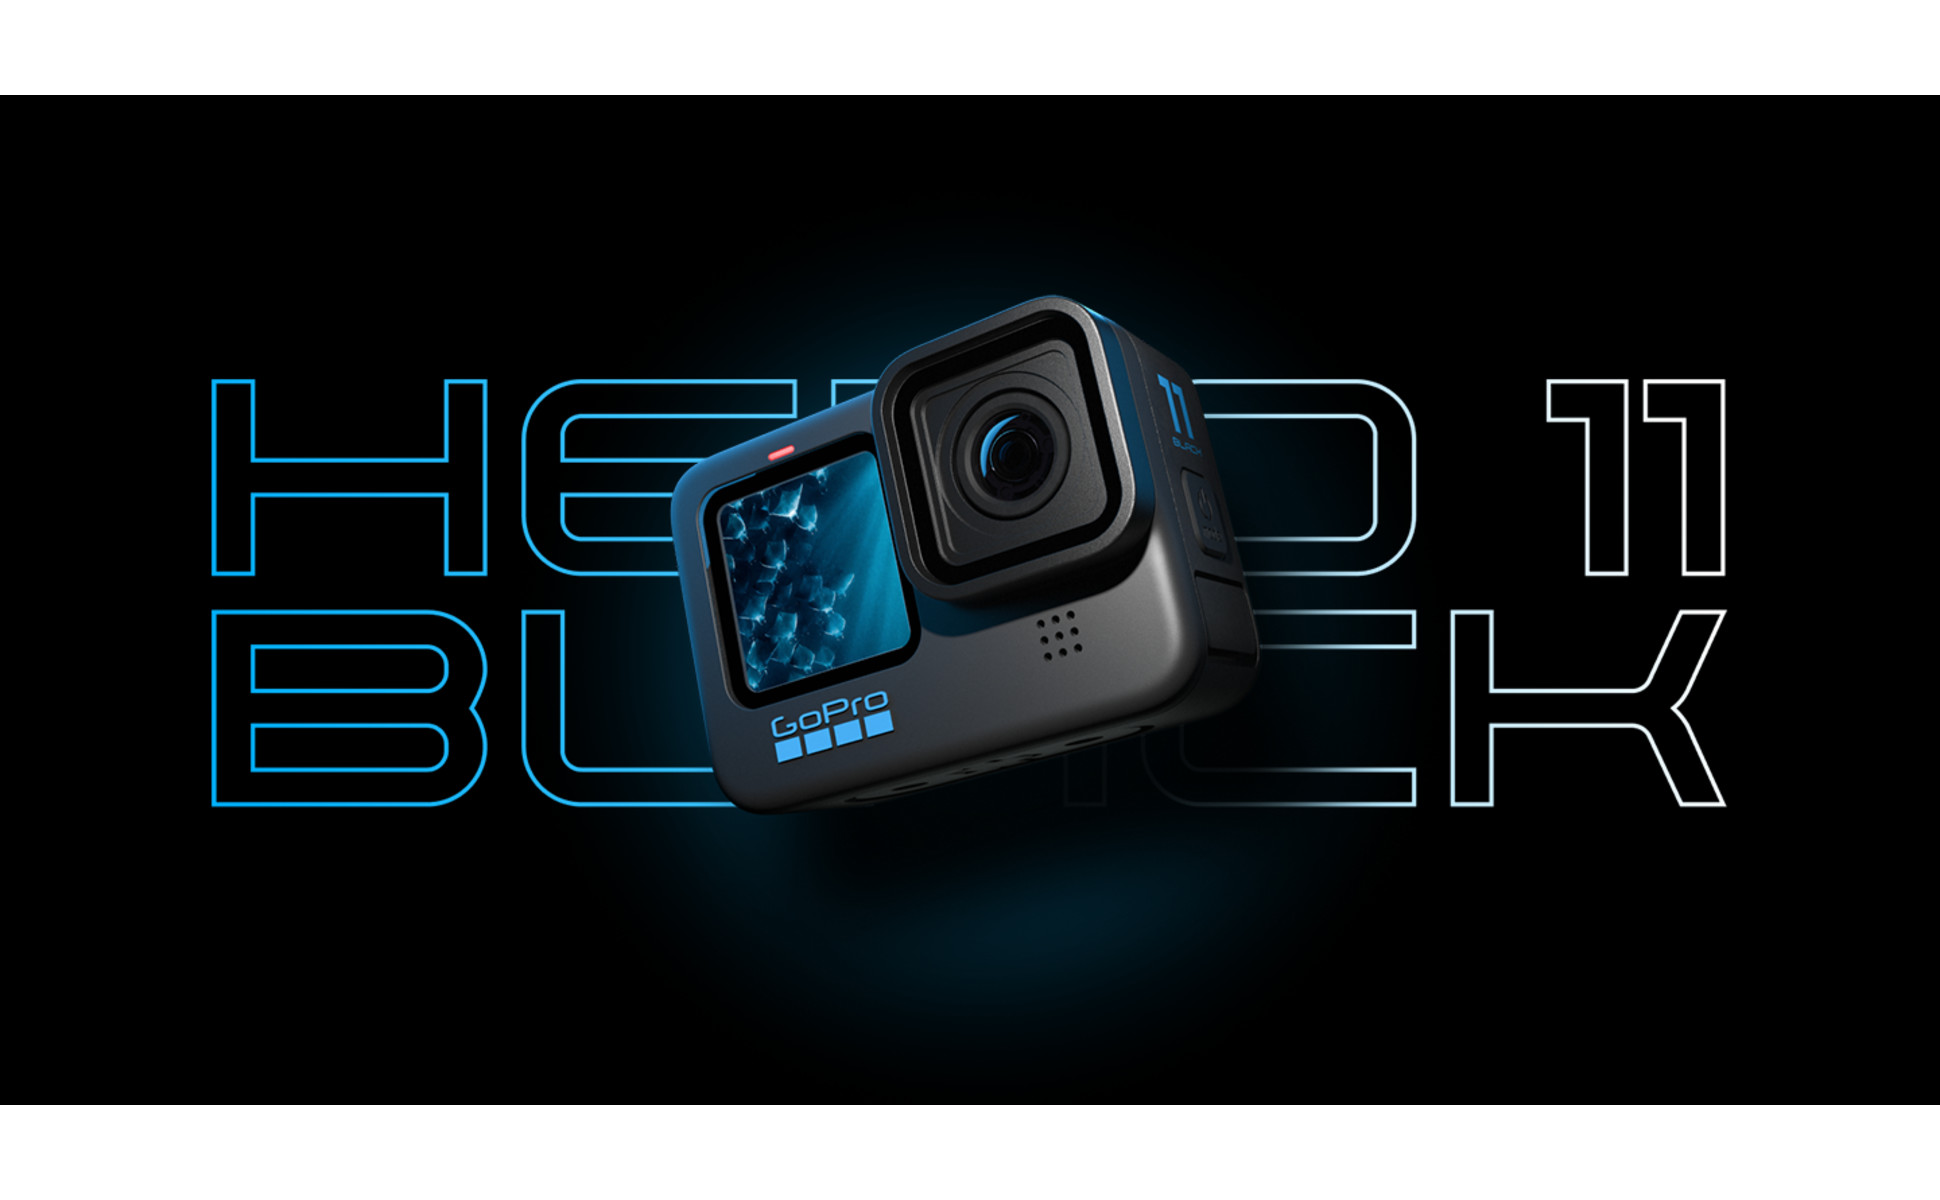  GoPro HERO11 (Hero 11) Black - Waterproof Action Camera with  5.3K Ultra HD Video, 27MP Photos, 1/1.9 Image Sensor, Live Streaming,  Webcam + 50 Piece Bundle with 2 Extra Batteries and Charger : Electronics